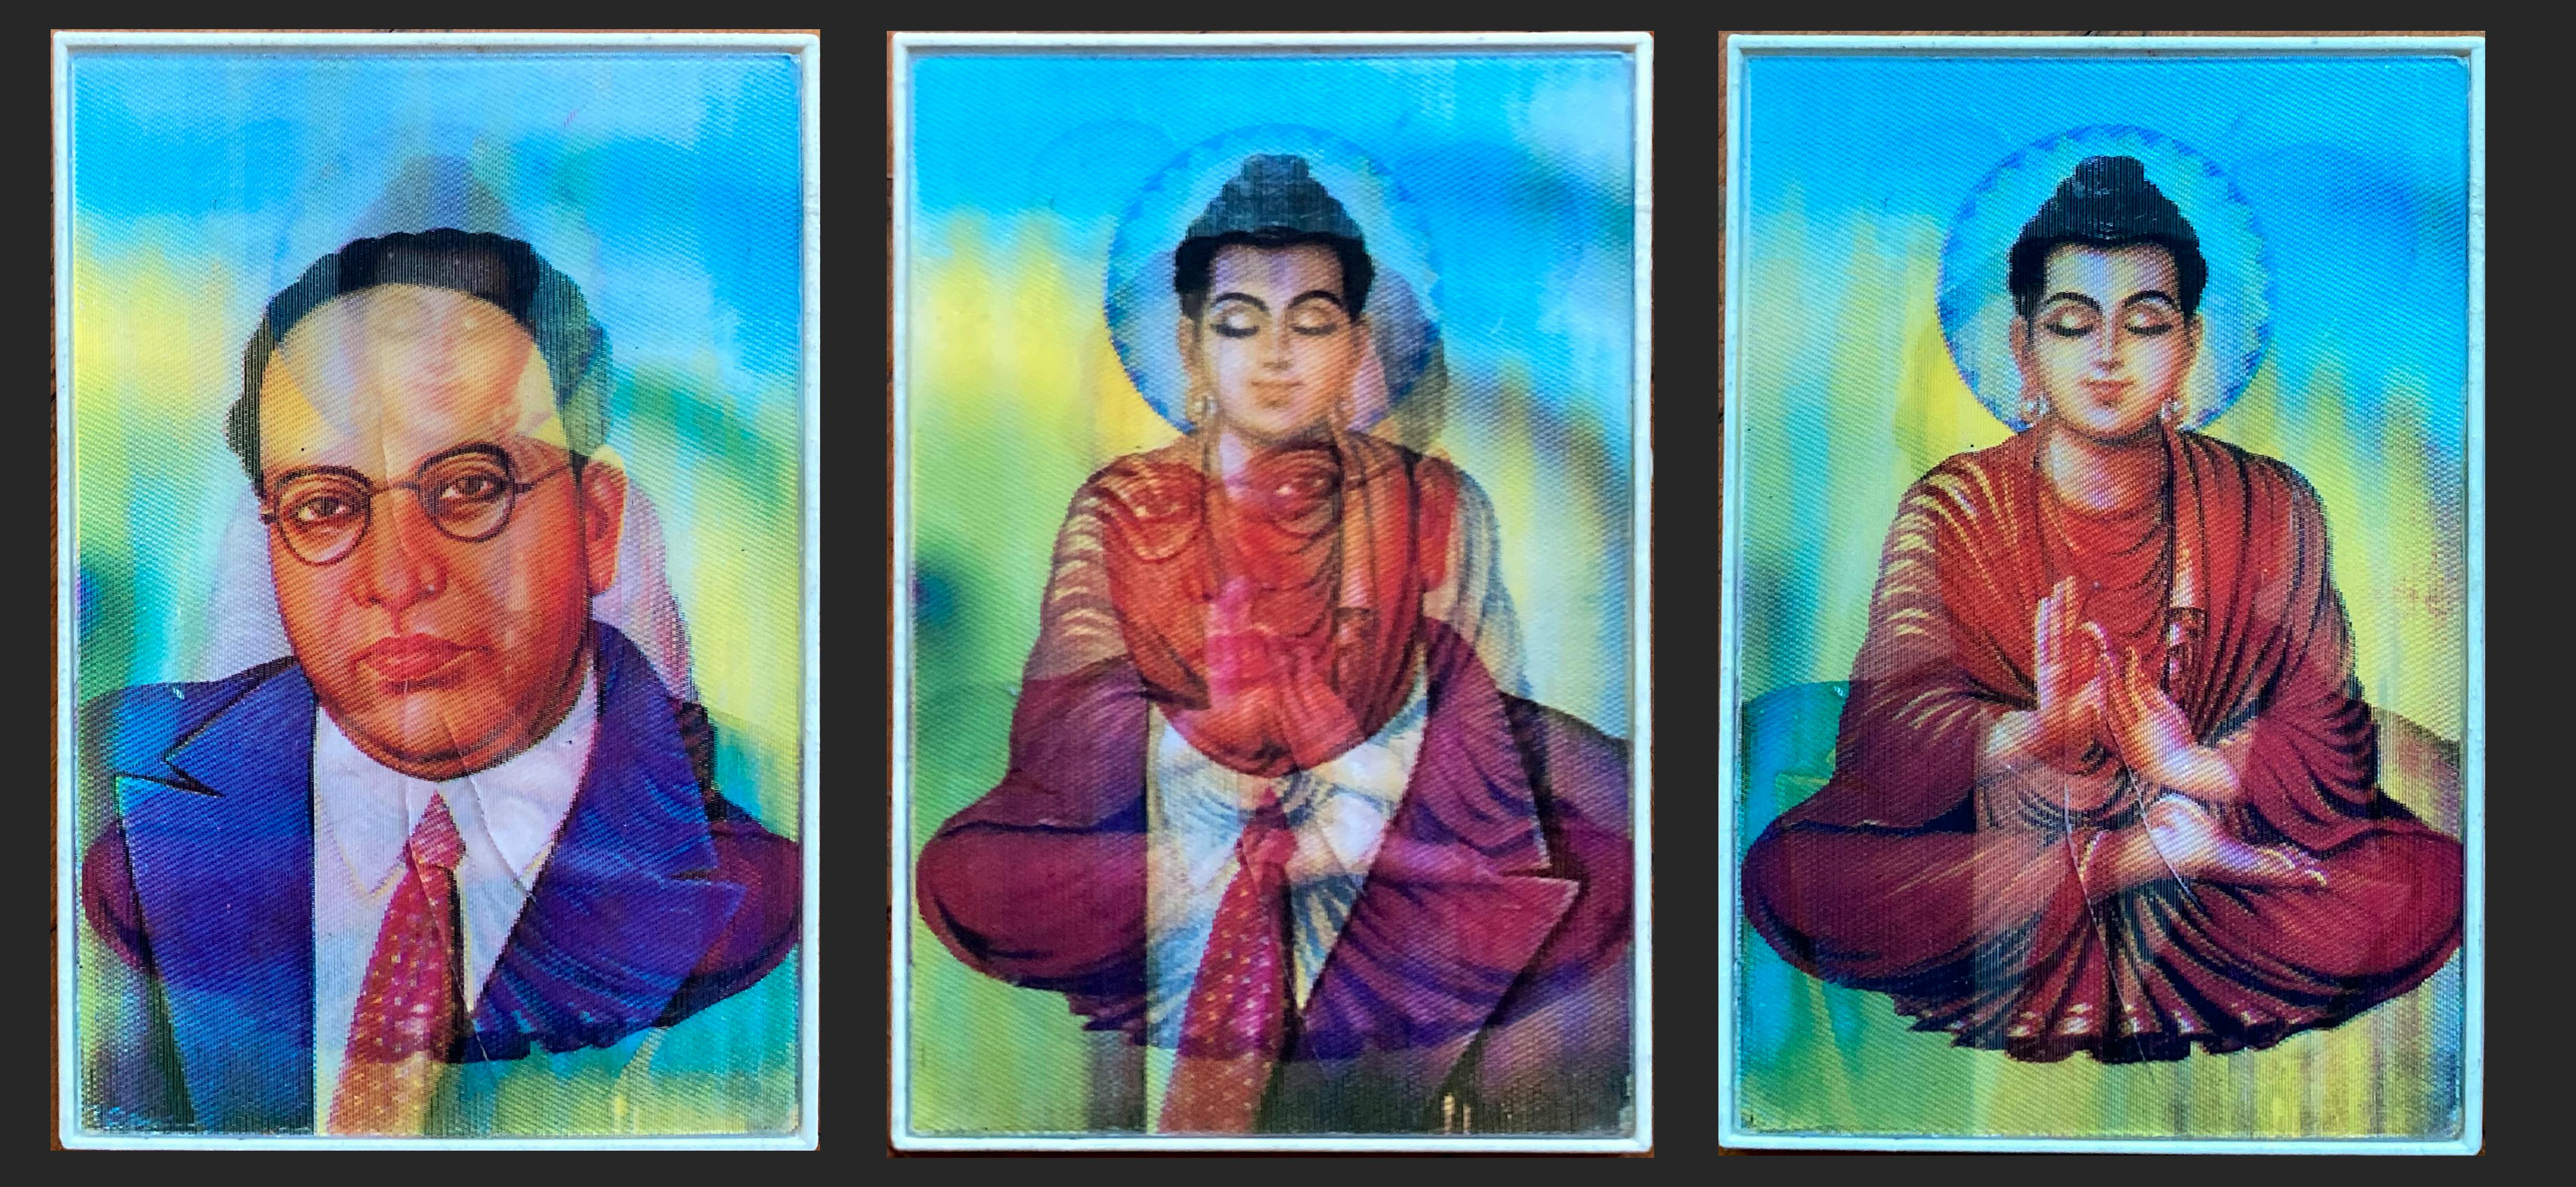 triptych showing the transition between the two phases of a hollographic card with an illustration of a bust of man in a suit on the left and an illustraion of the buddha in a meditation pose on the right